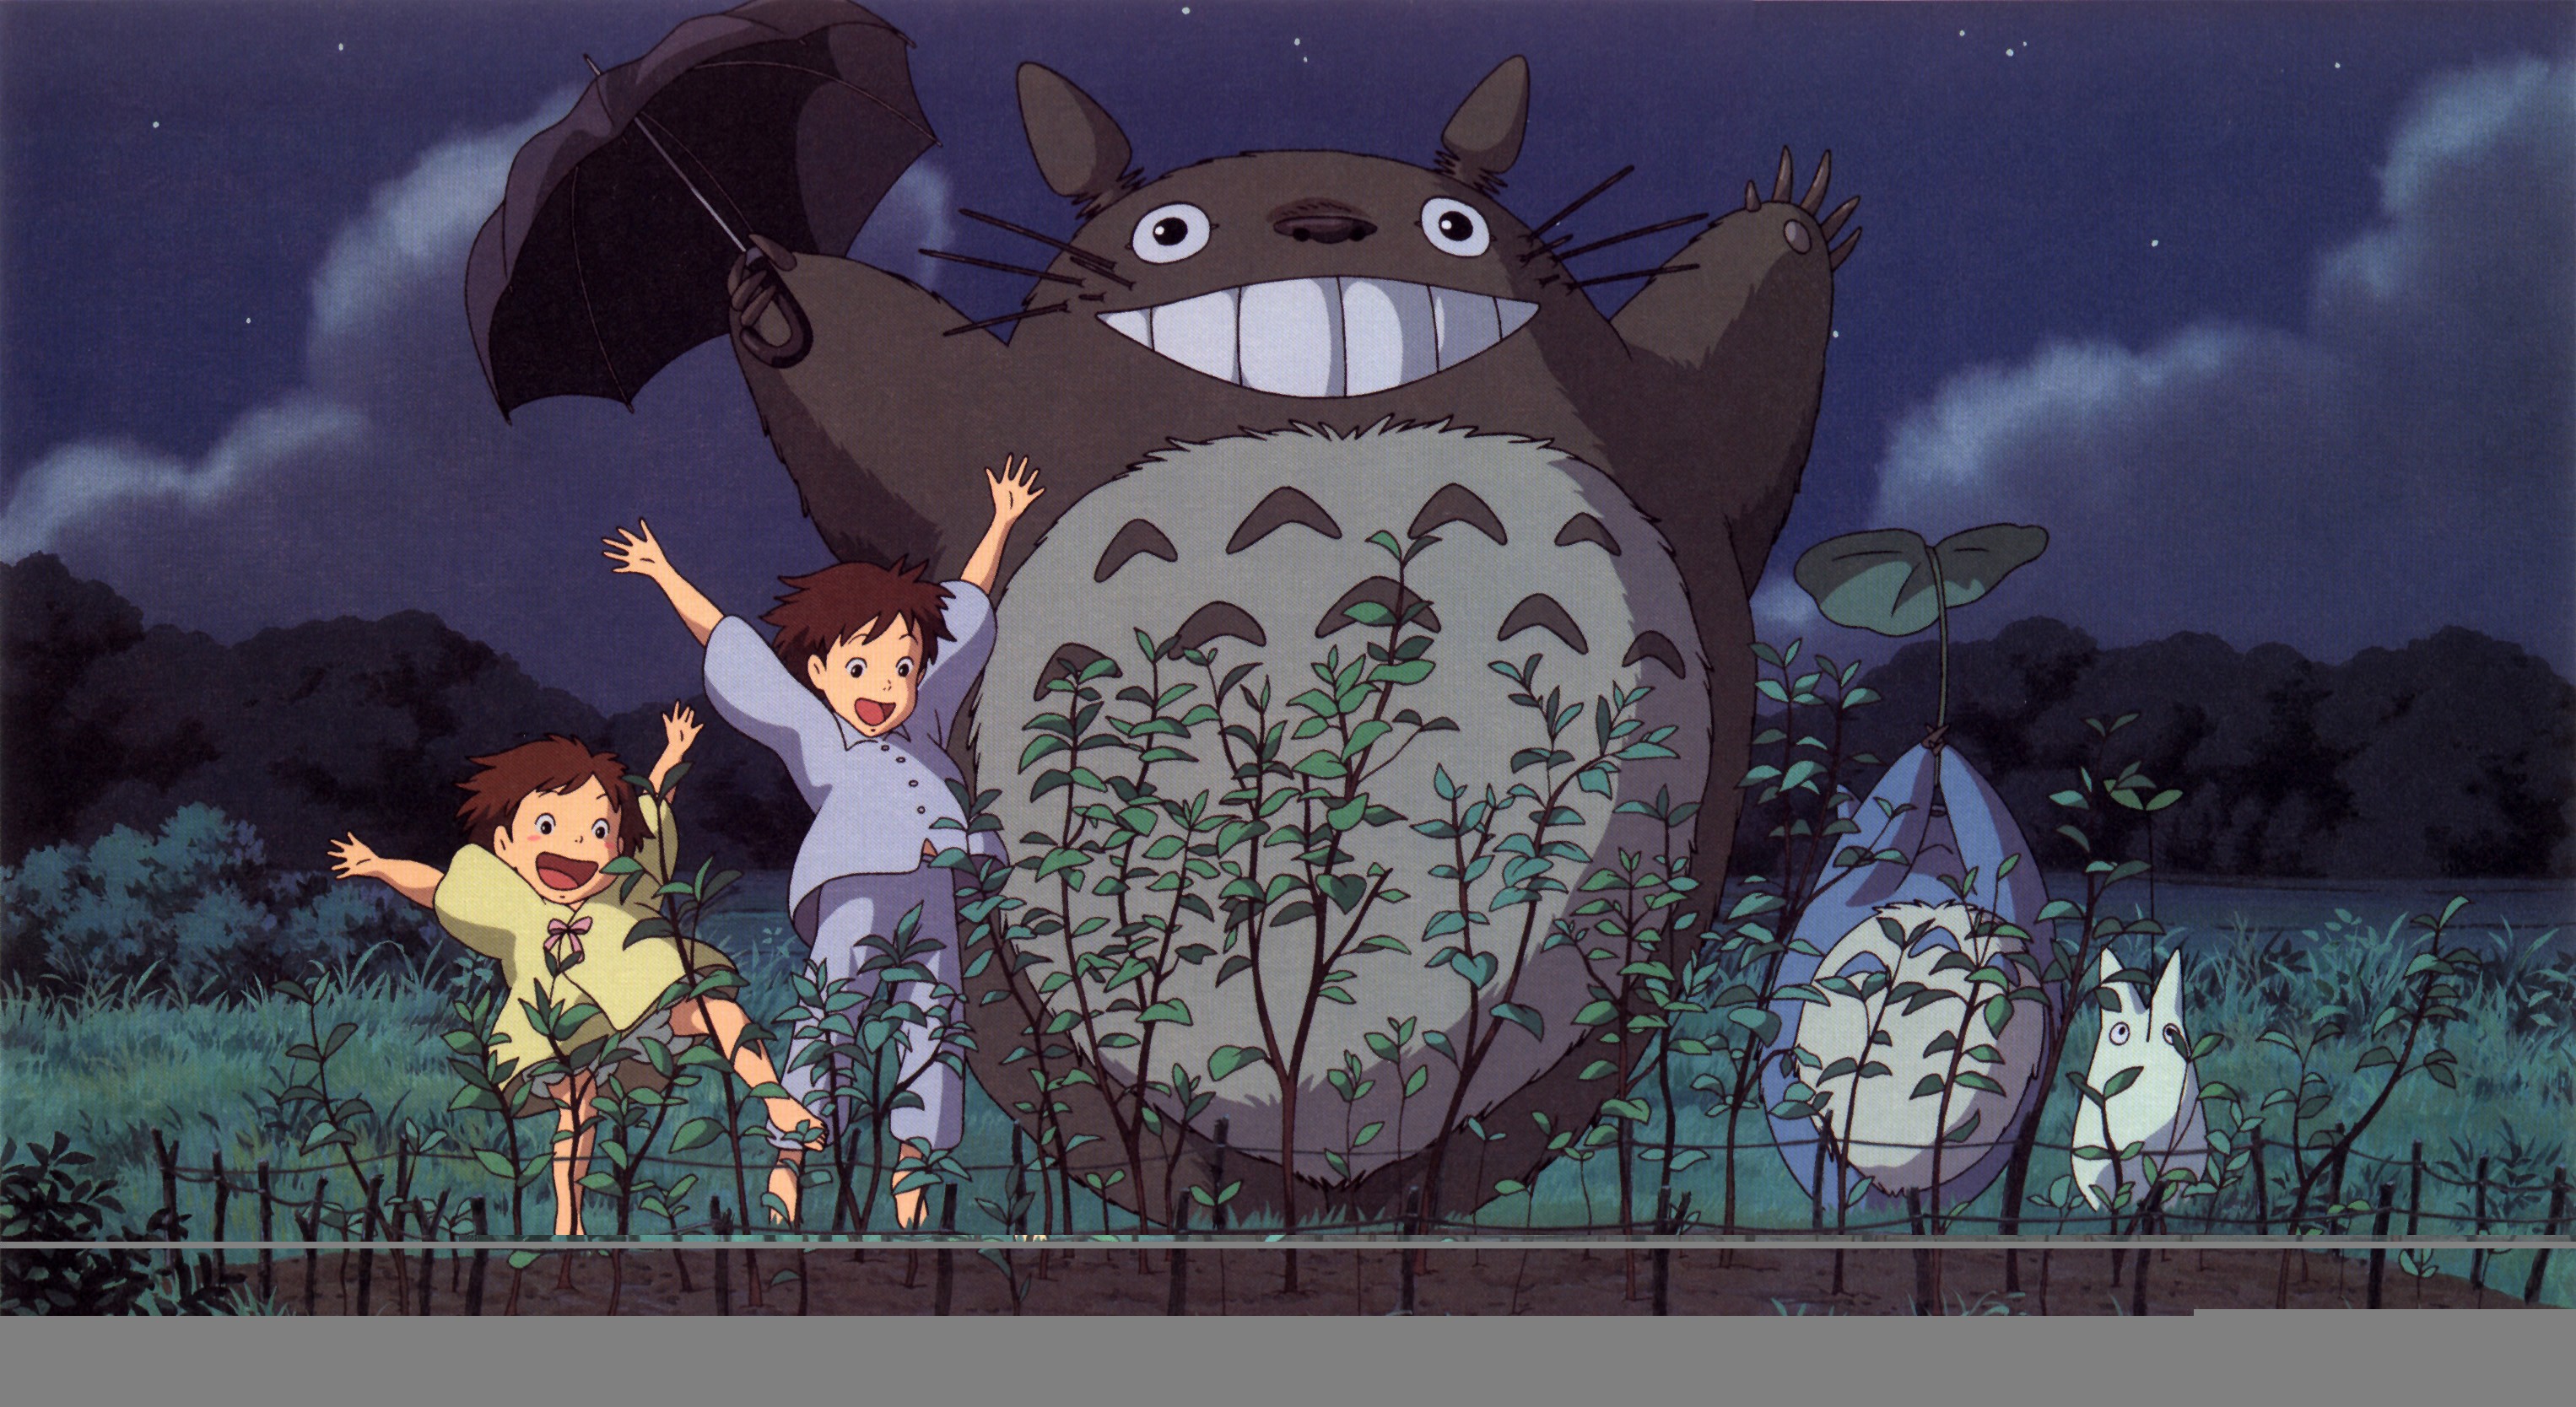 A still from ‘My Neighbour Totoro’, a 1988 Japanese animated fantasy film written and directed by Hayao Miyazaki and produced by Studio Ghibli which finally got a release in China this month. Photo: Courtesy of Studio Ghibli